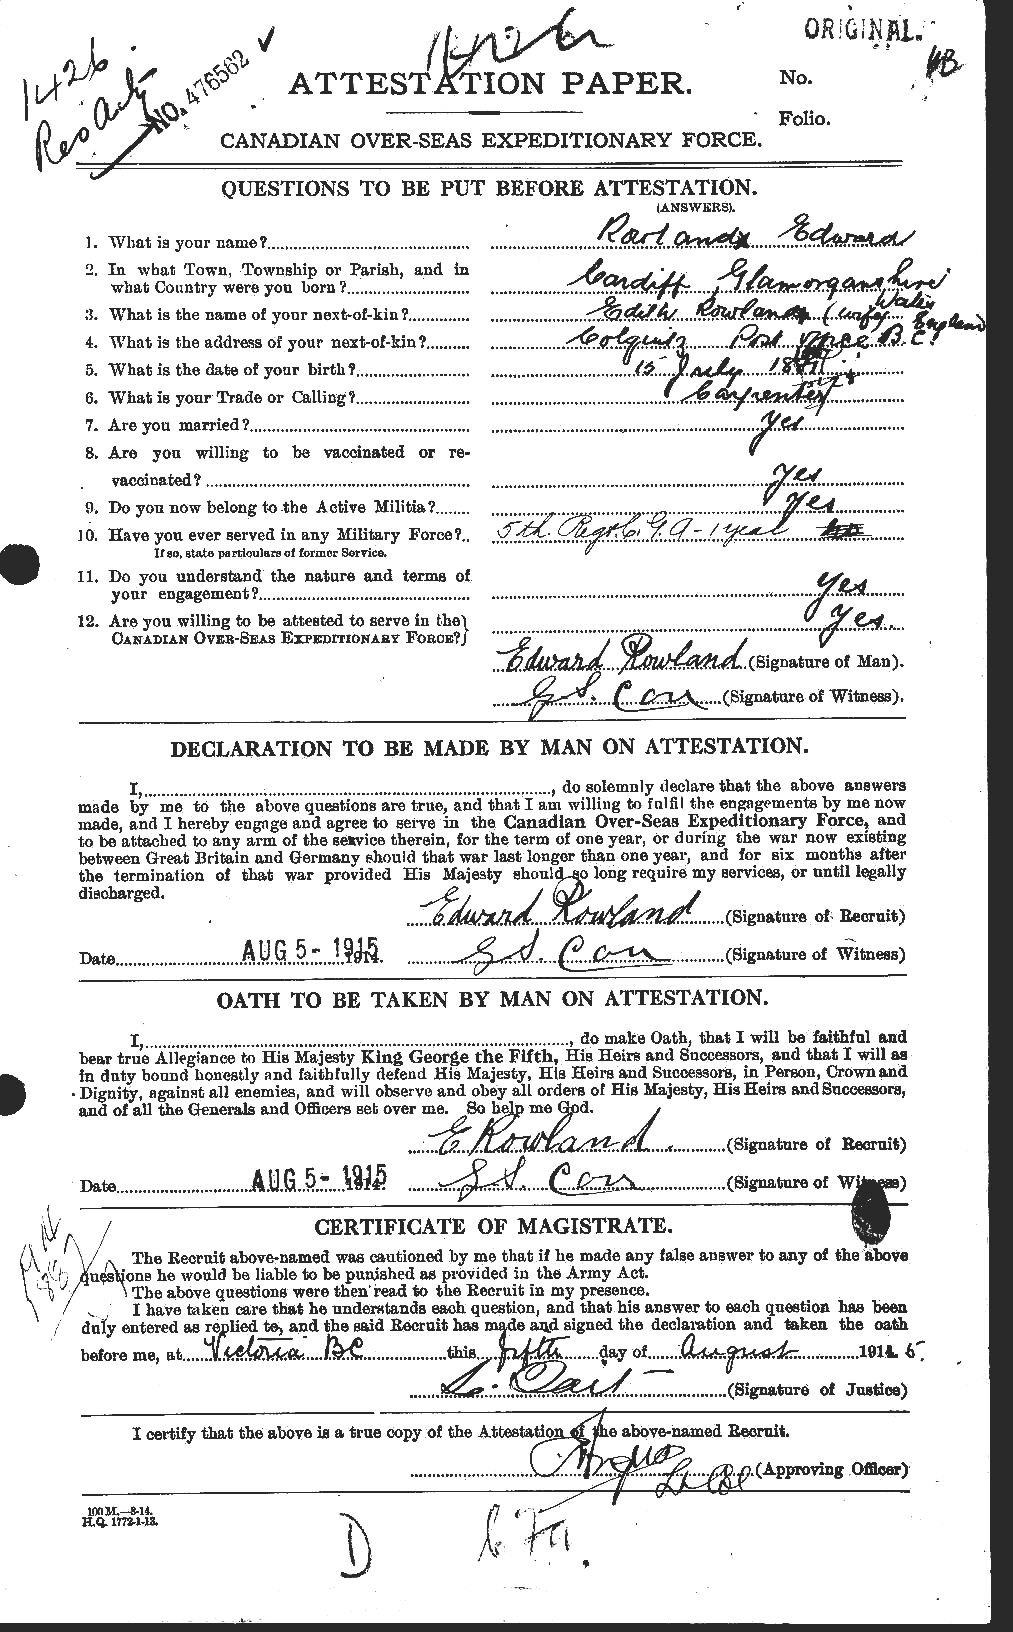 Personnel Records of the First World War - CEF 616102a